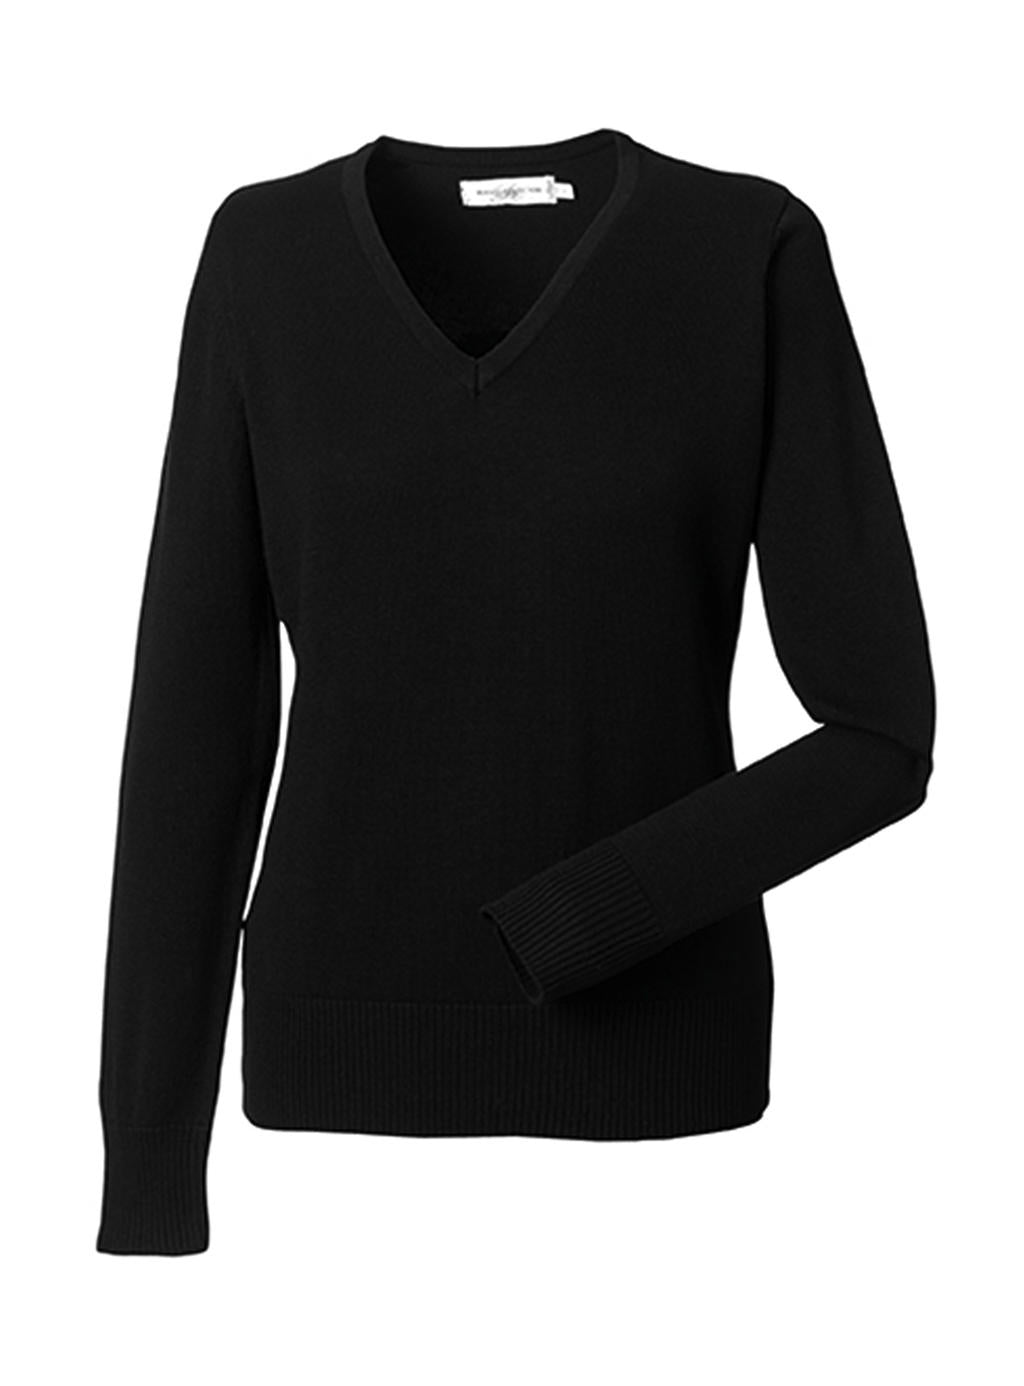 Russel Europe Ladies V-Neck Knitted Damen Pullover